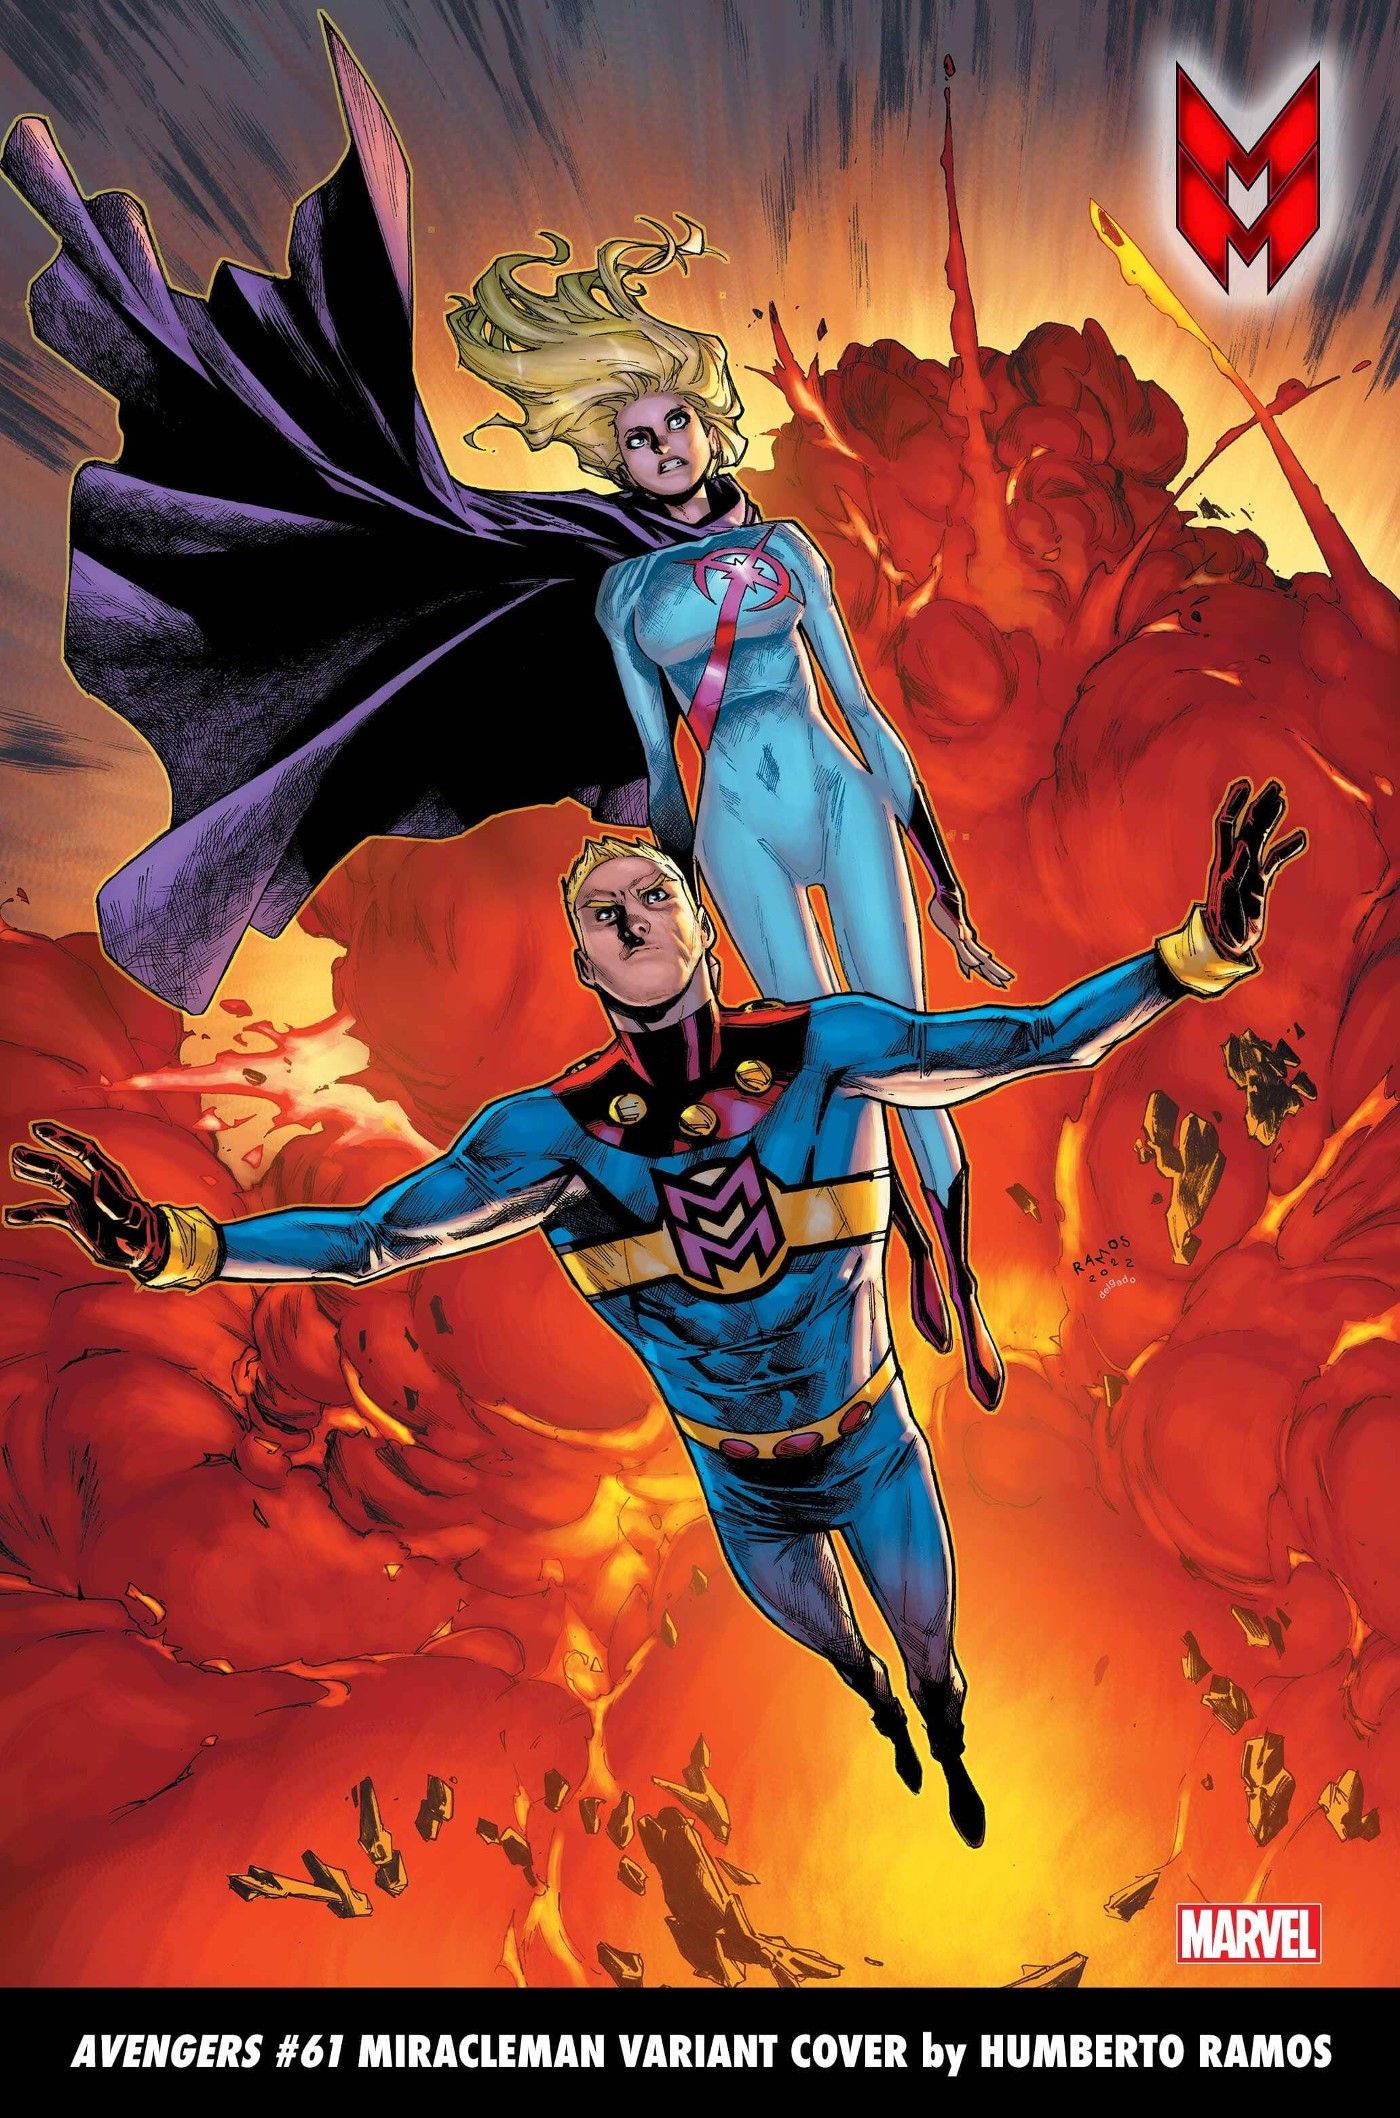 AVENGERS 61 MIRACLEMAN VARIANT COVER by HUMBERTO RAMOS